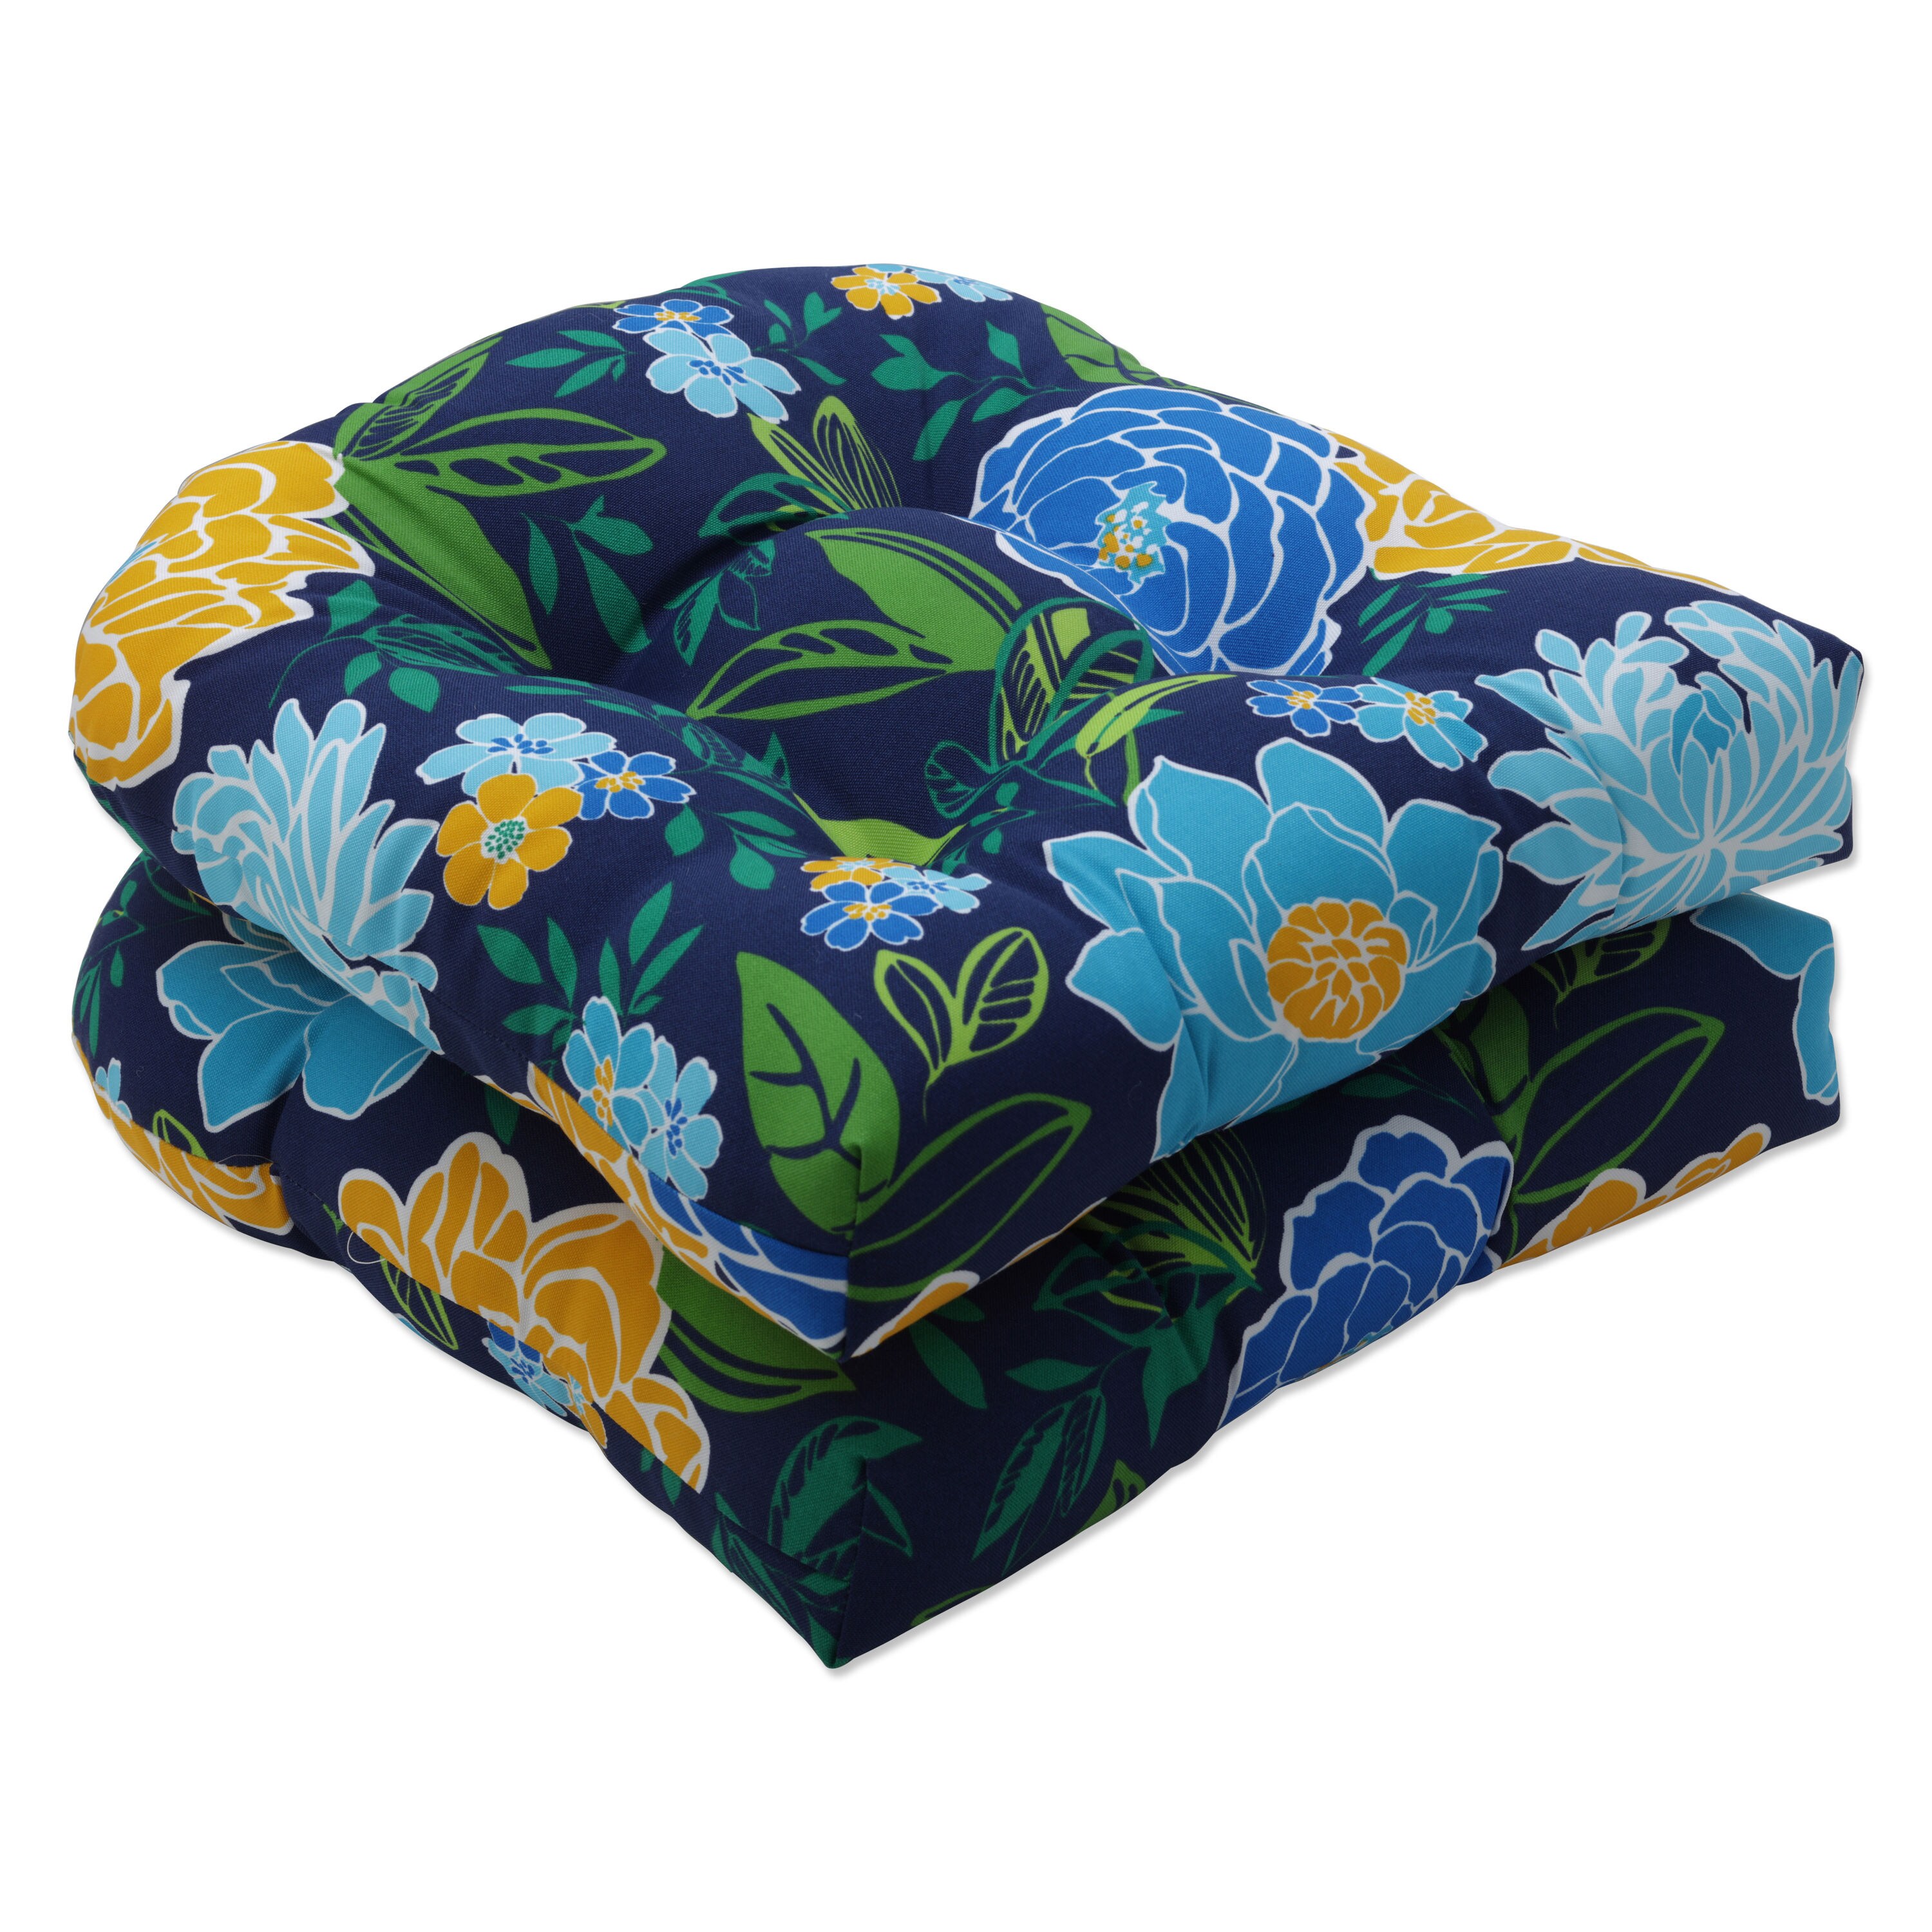 Pillow Perfect Indoor/Outdoor Black/Yellow Floral Wicker Seat Cushions 2-Pack 